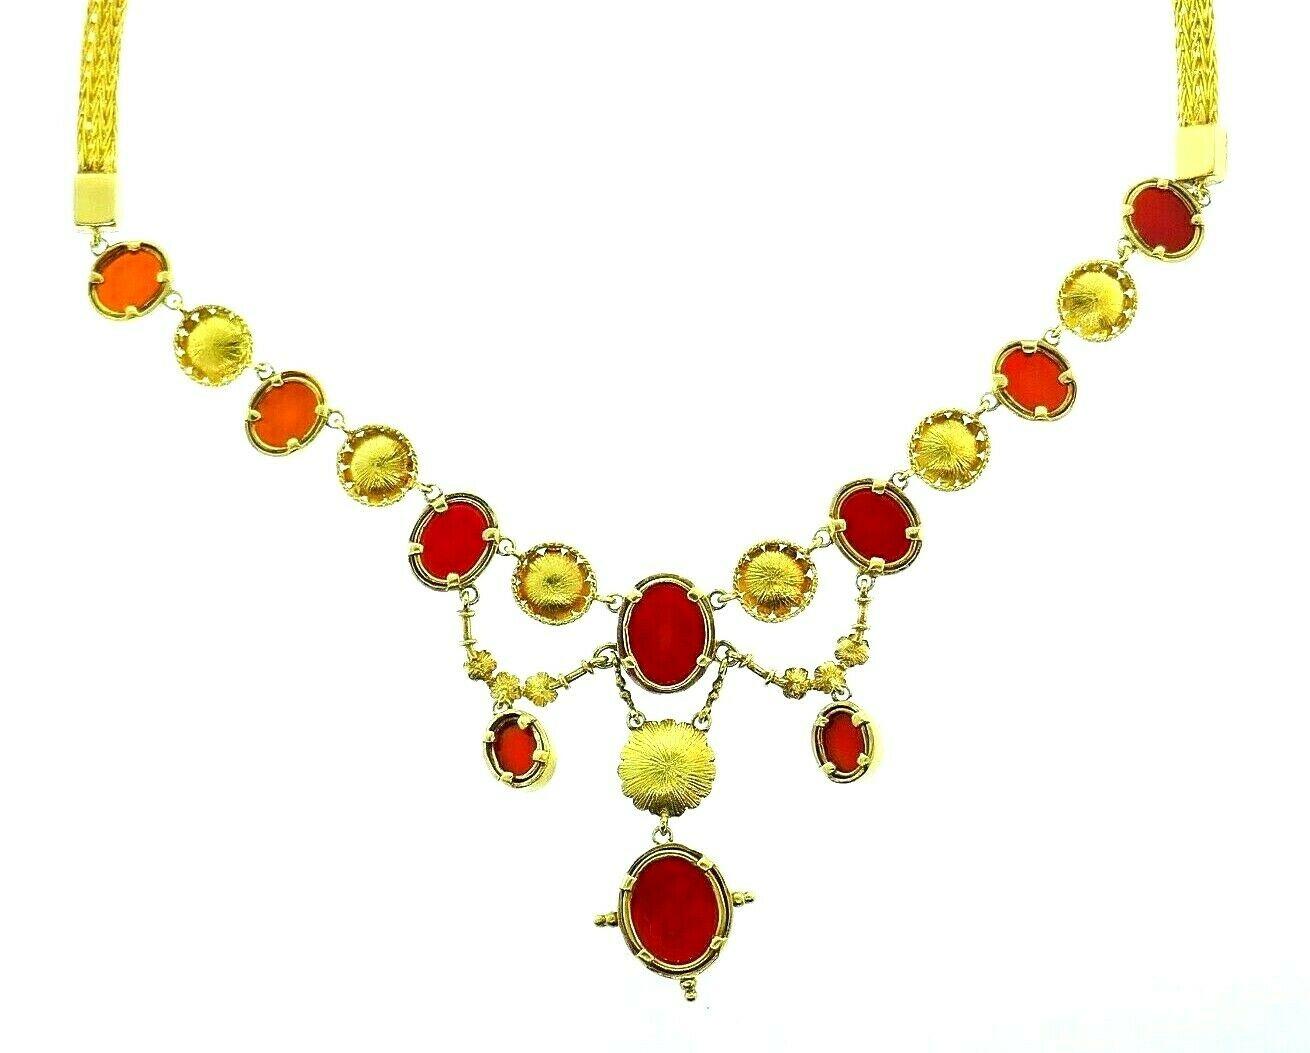 Women's Ilias Lalaounis Yellow Gold Carved Carnelian Necklace